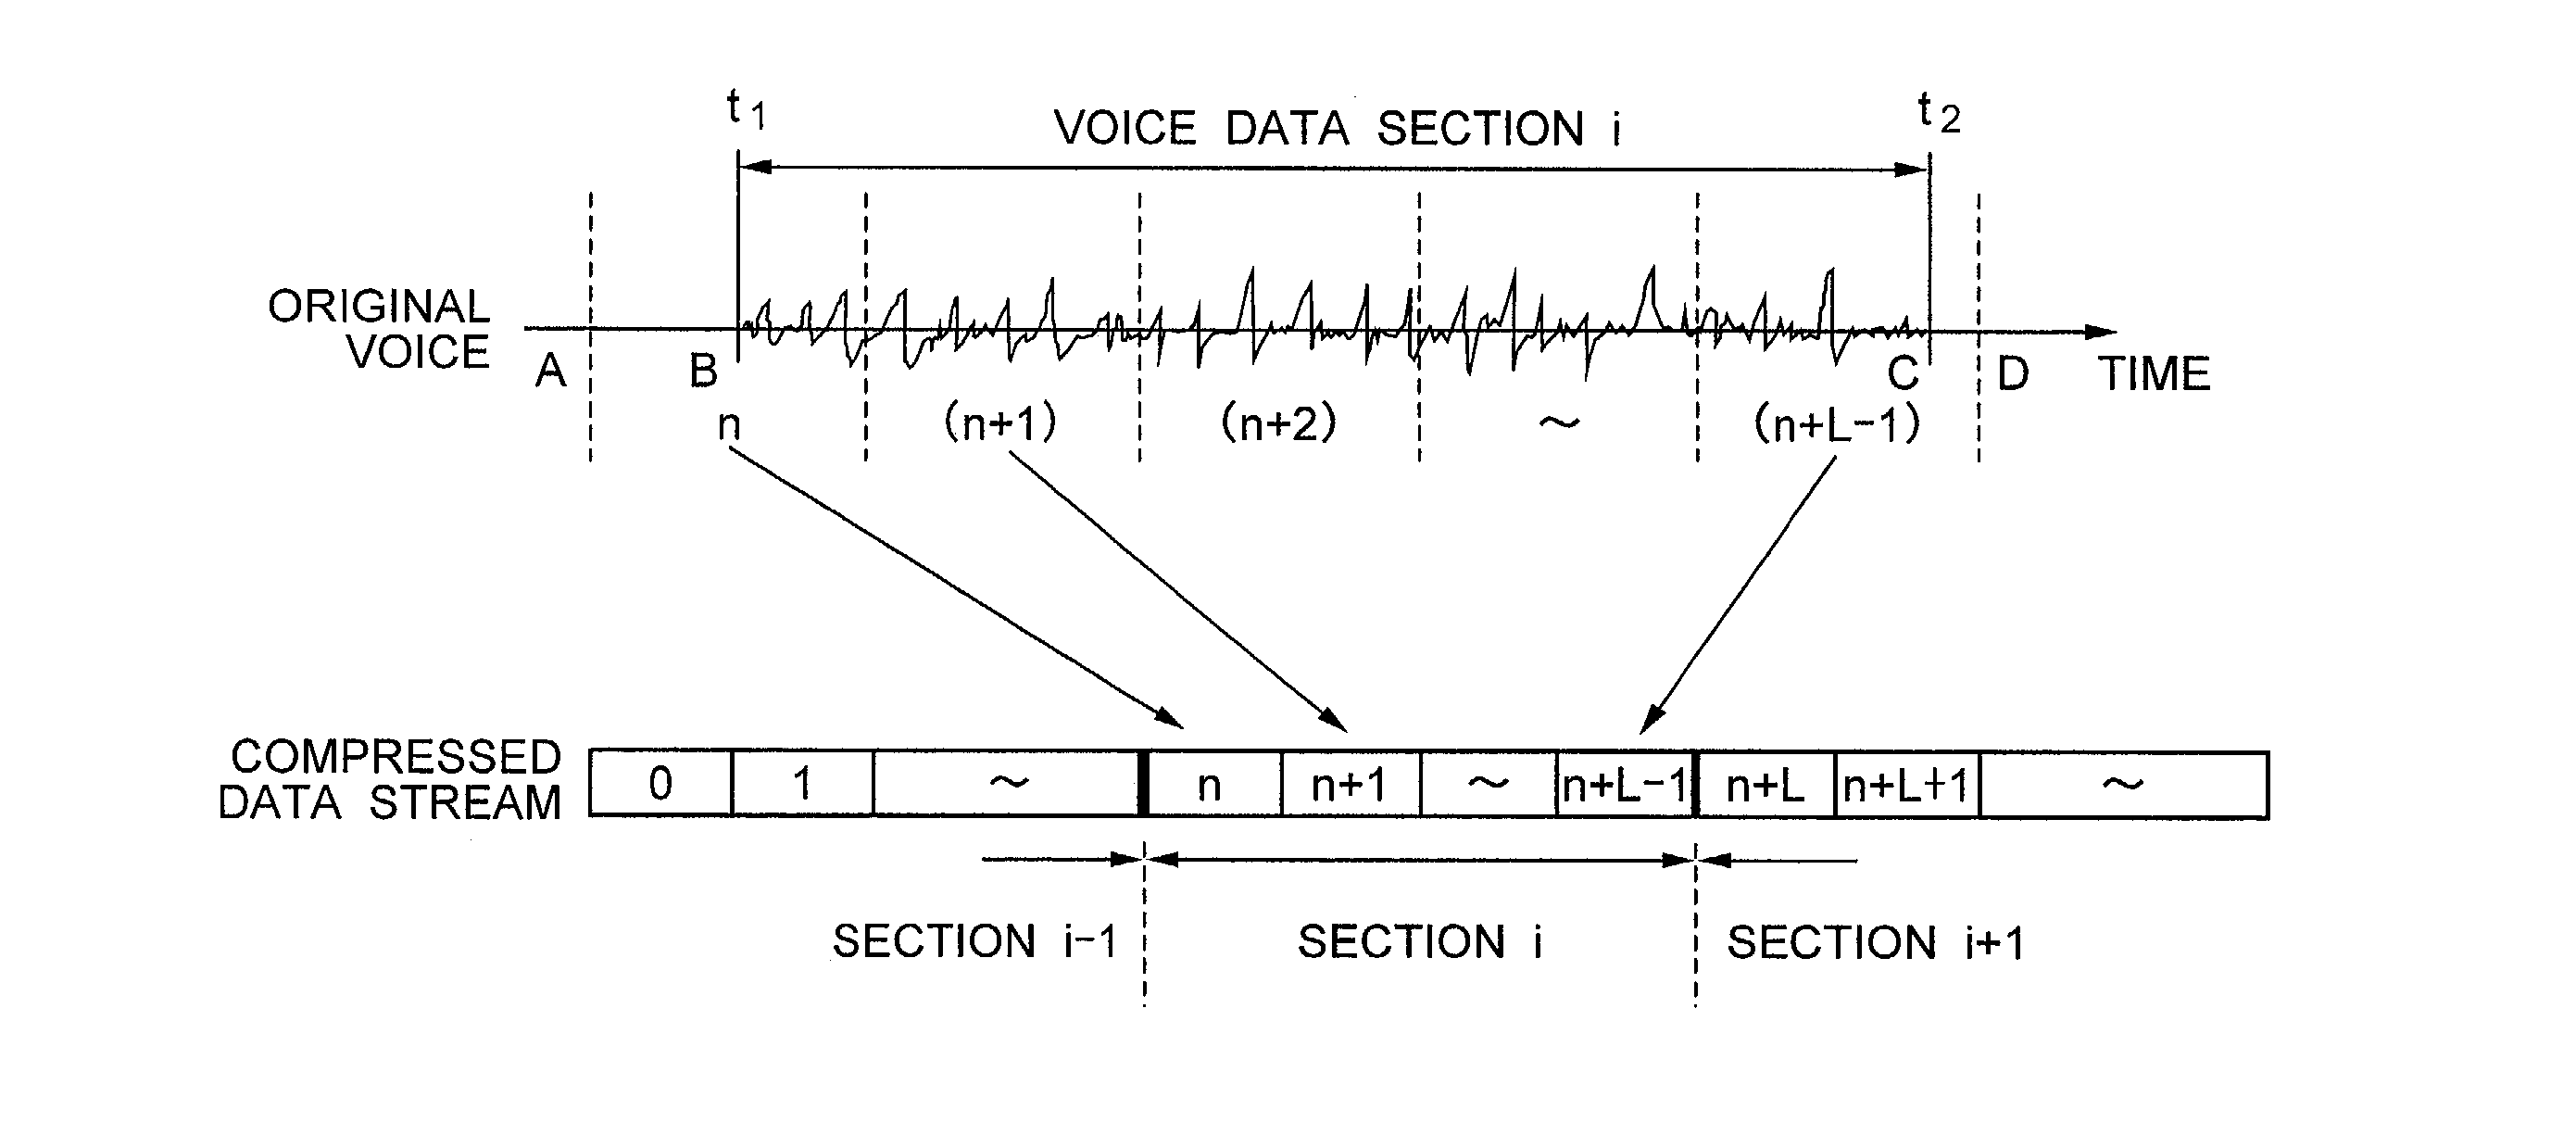 Method for synthesizing a voice waveform which includes compressing voice-element data in a fixed length scheme and expanding compressed voice-element data of voice data sections